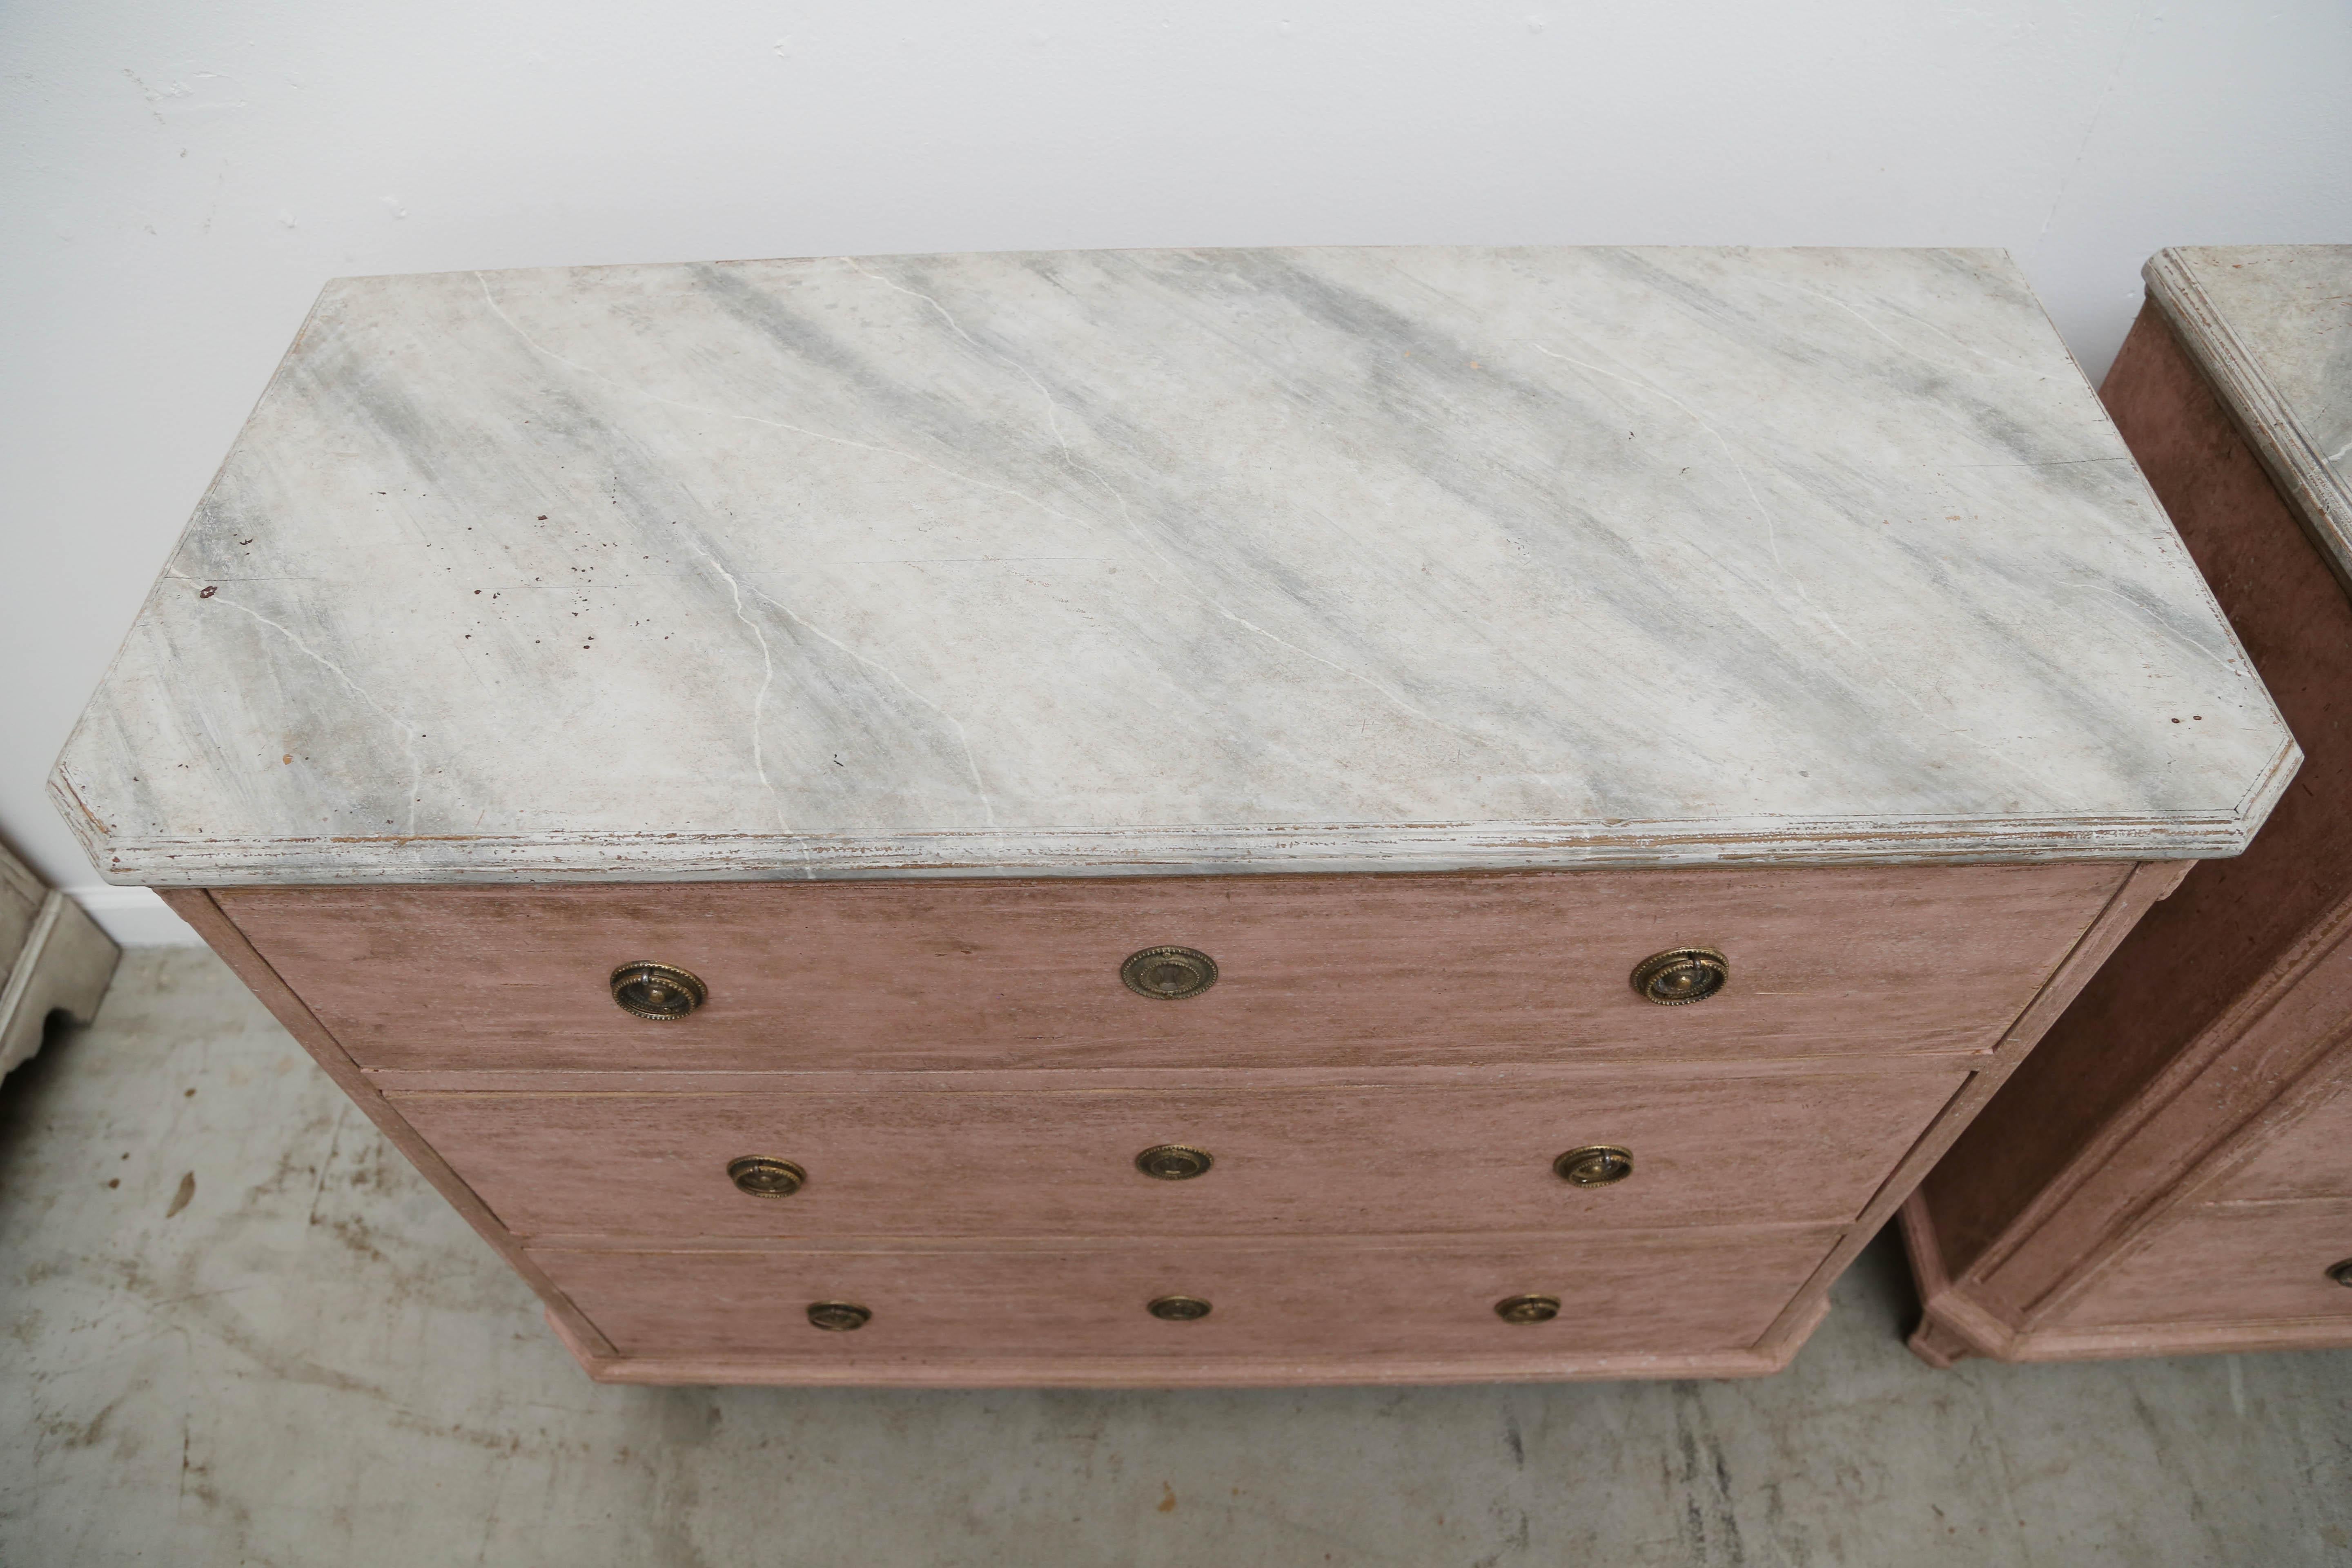 Pair of antique Swedish Gustavian style rose distressed painted chests. The tops are faux painted in greyish marble and extends down to the carved crown border, cut fluted carved corners ending with a rosette, threes drawers, and tapered fluted